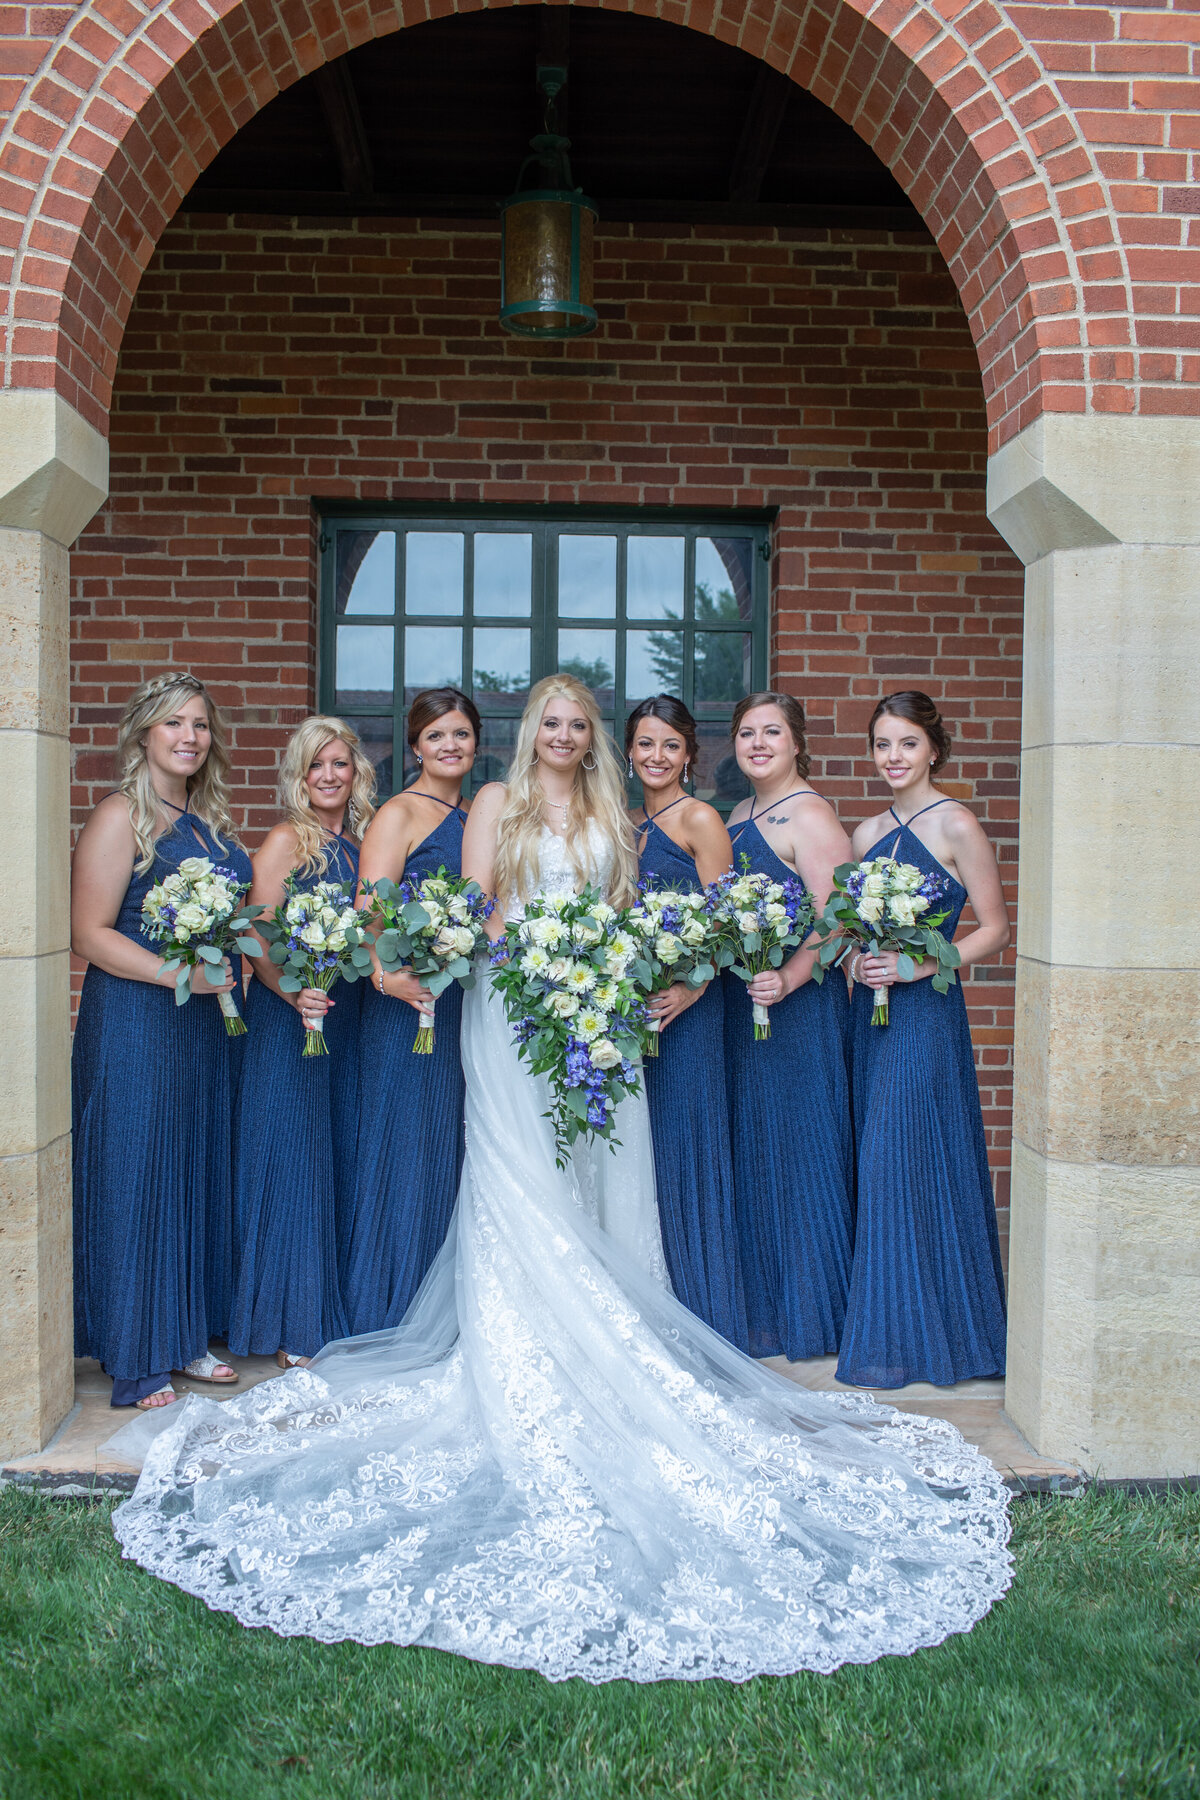 Bride and her bridesmaids pose under an archway